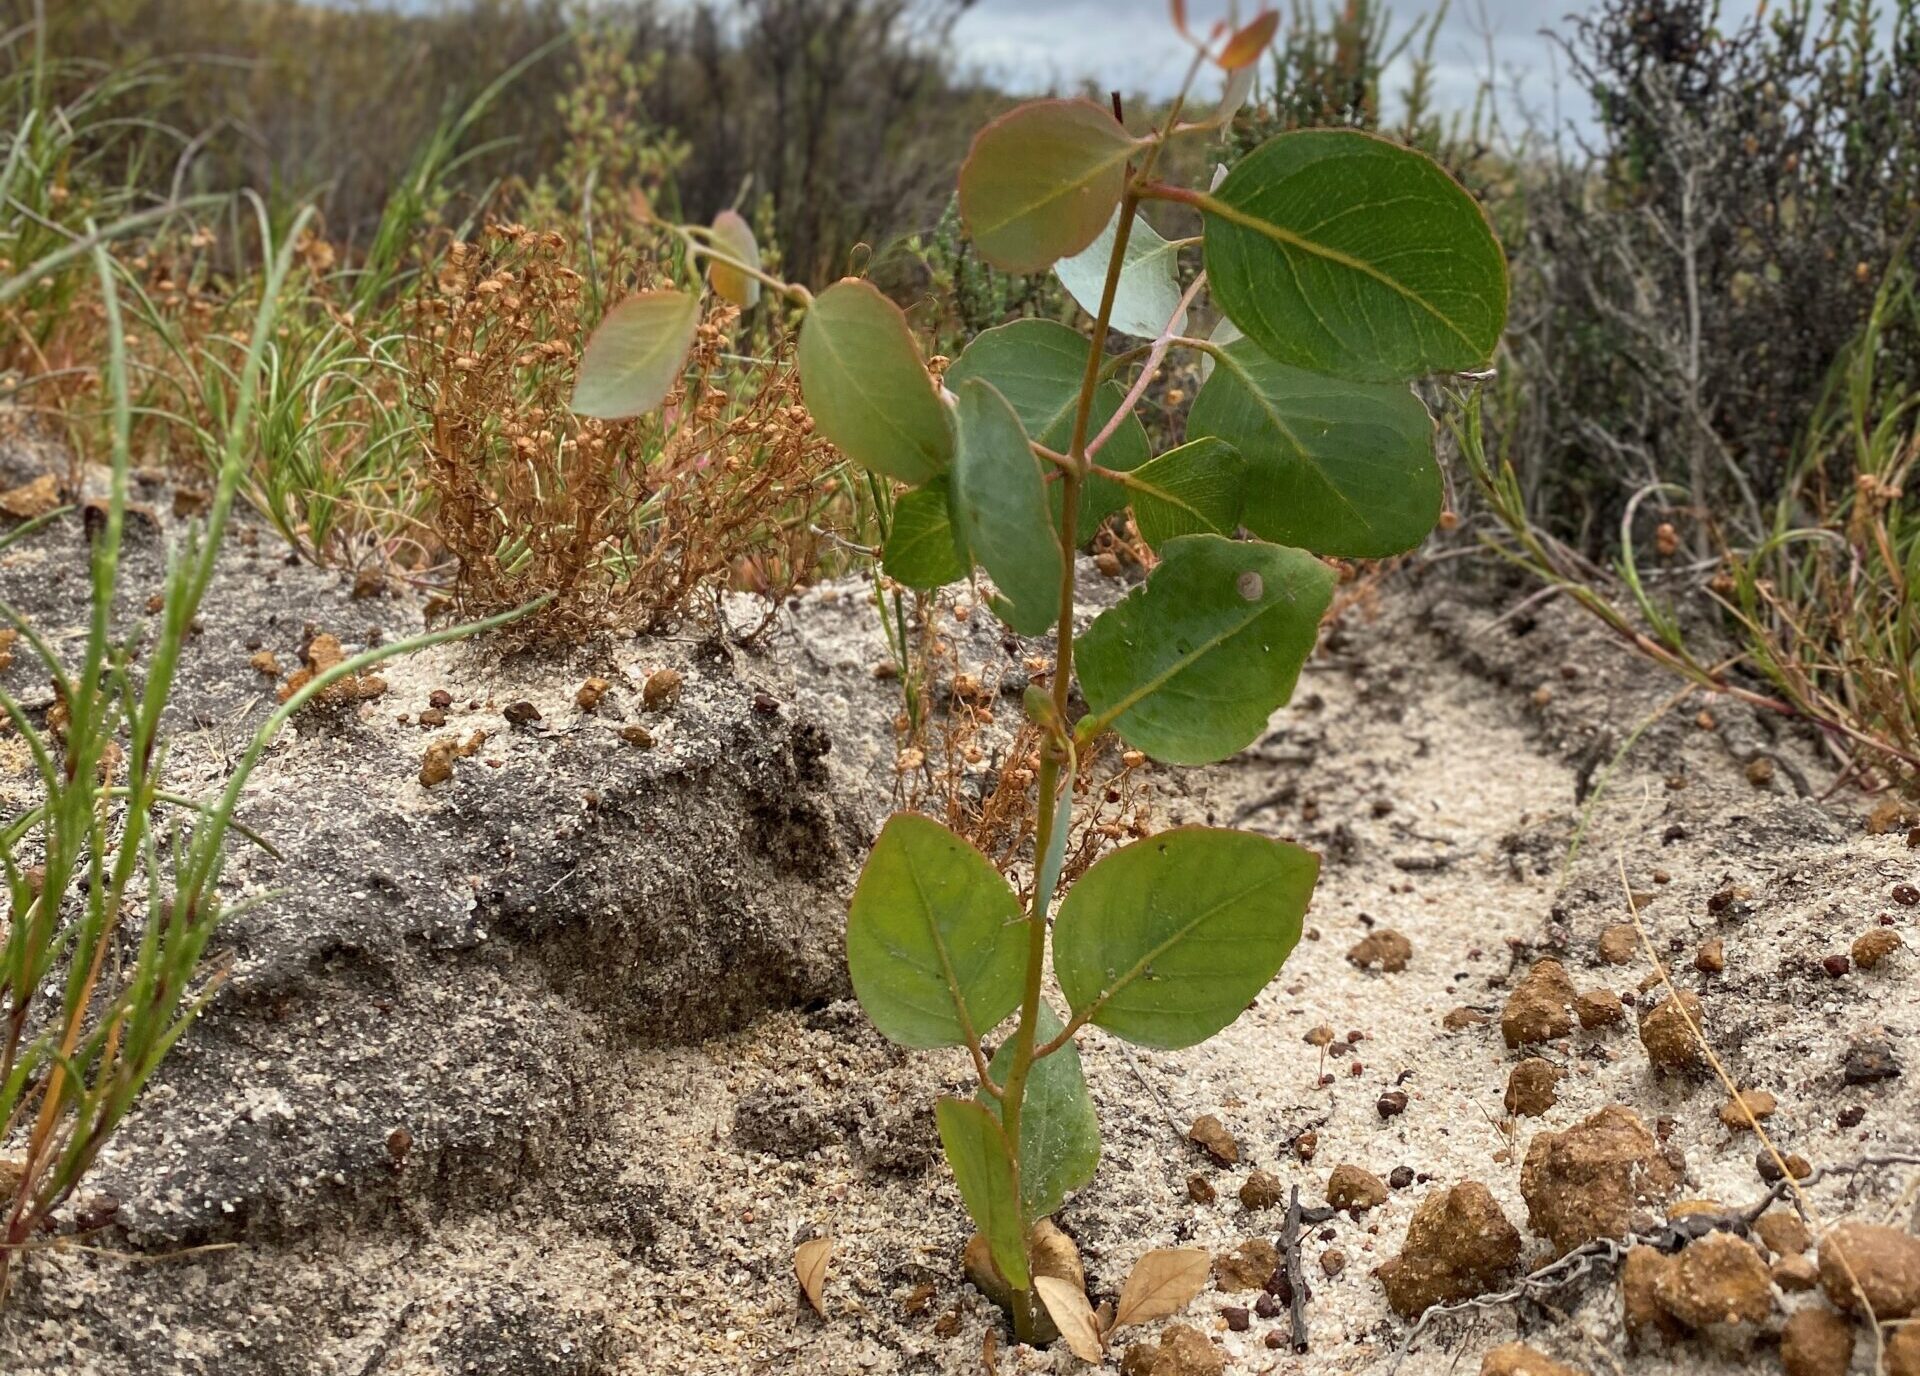 Close up of a Eucalyptus seedling planted in a mound